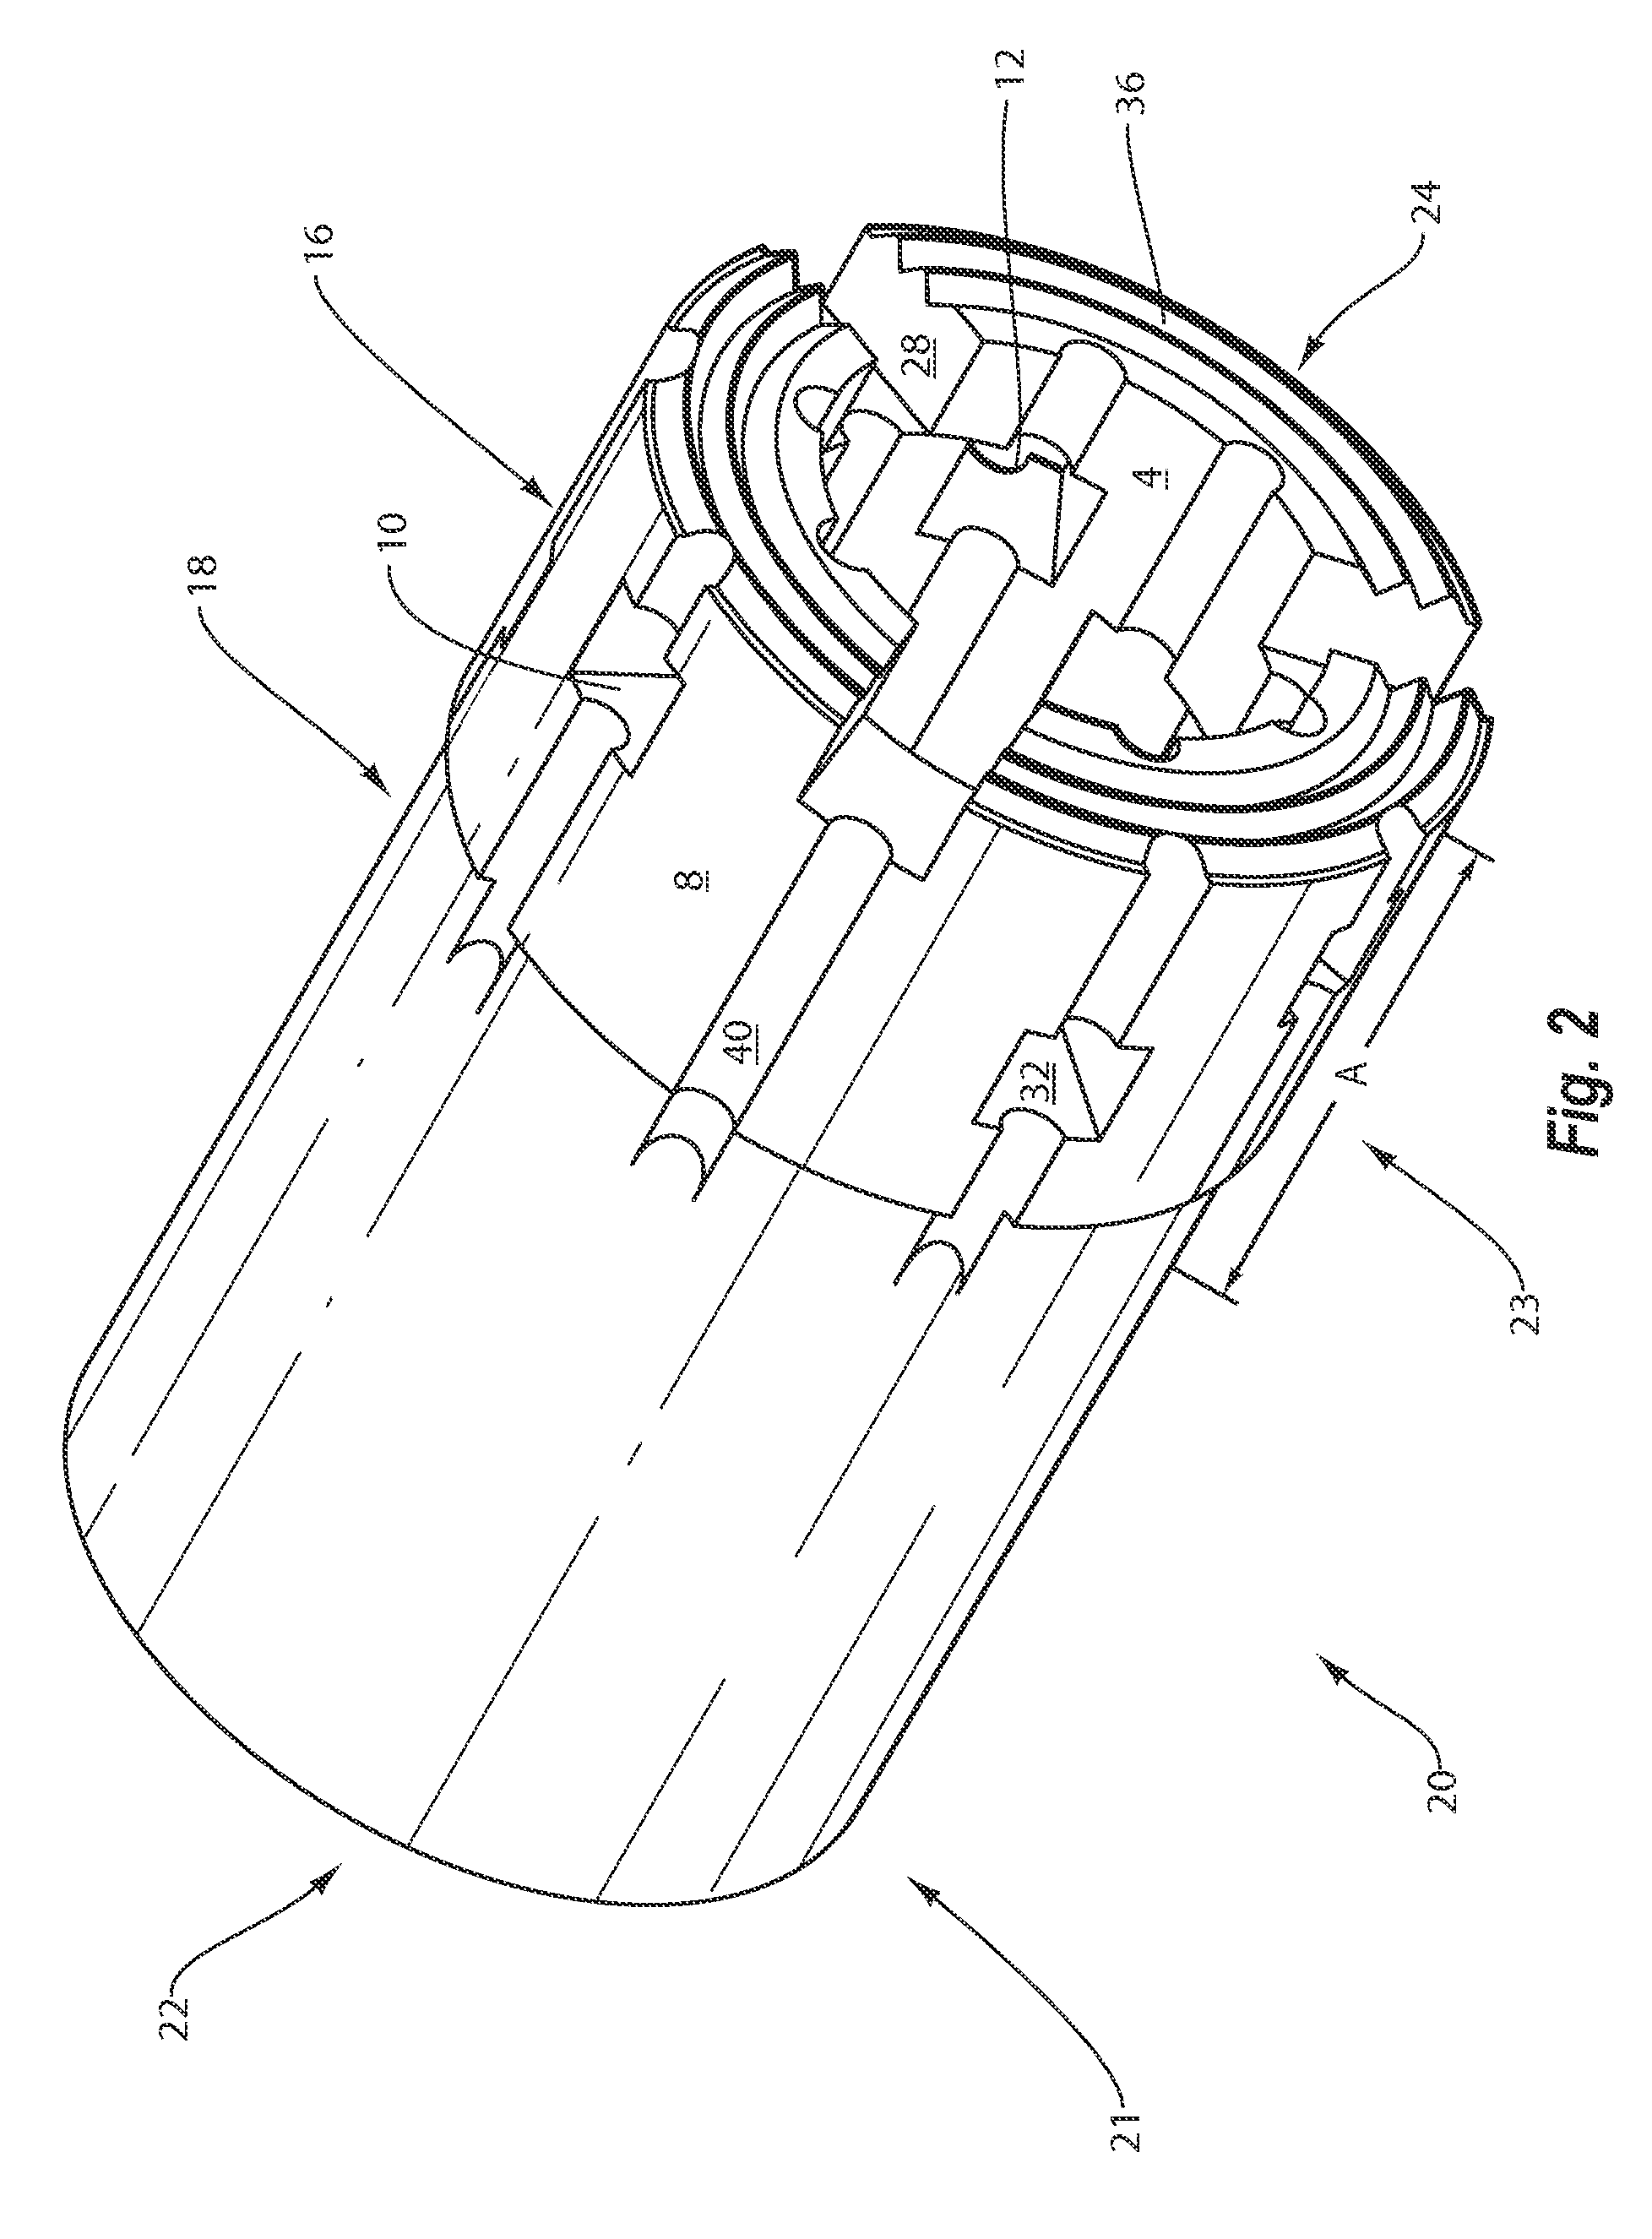 Drill bits with enclosed fluid slots